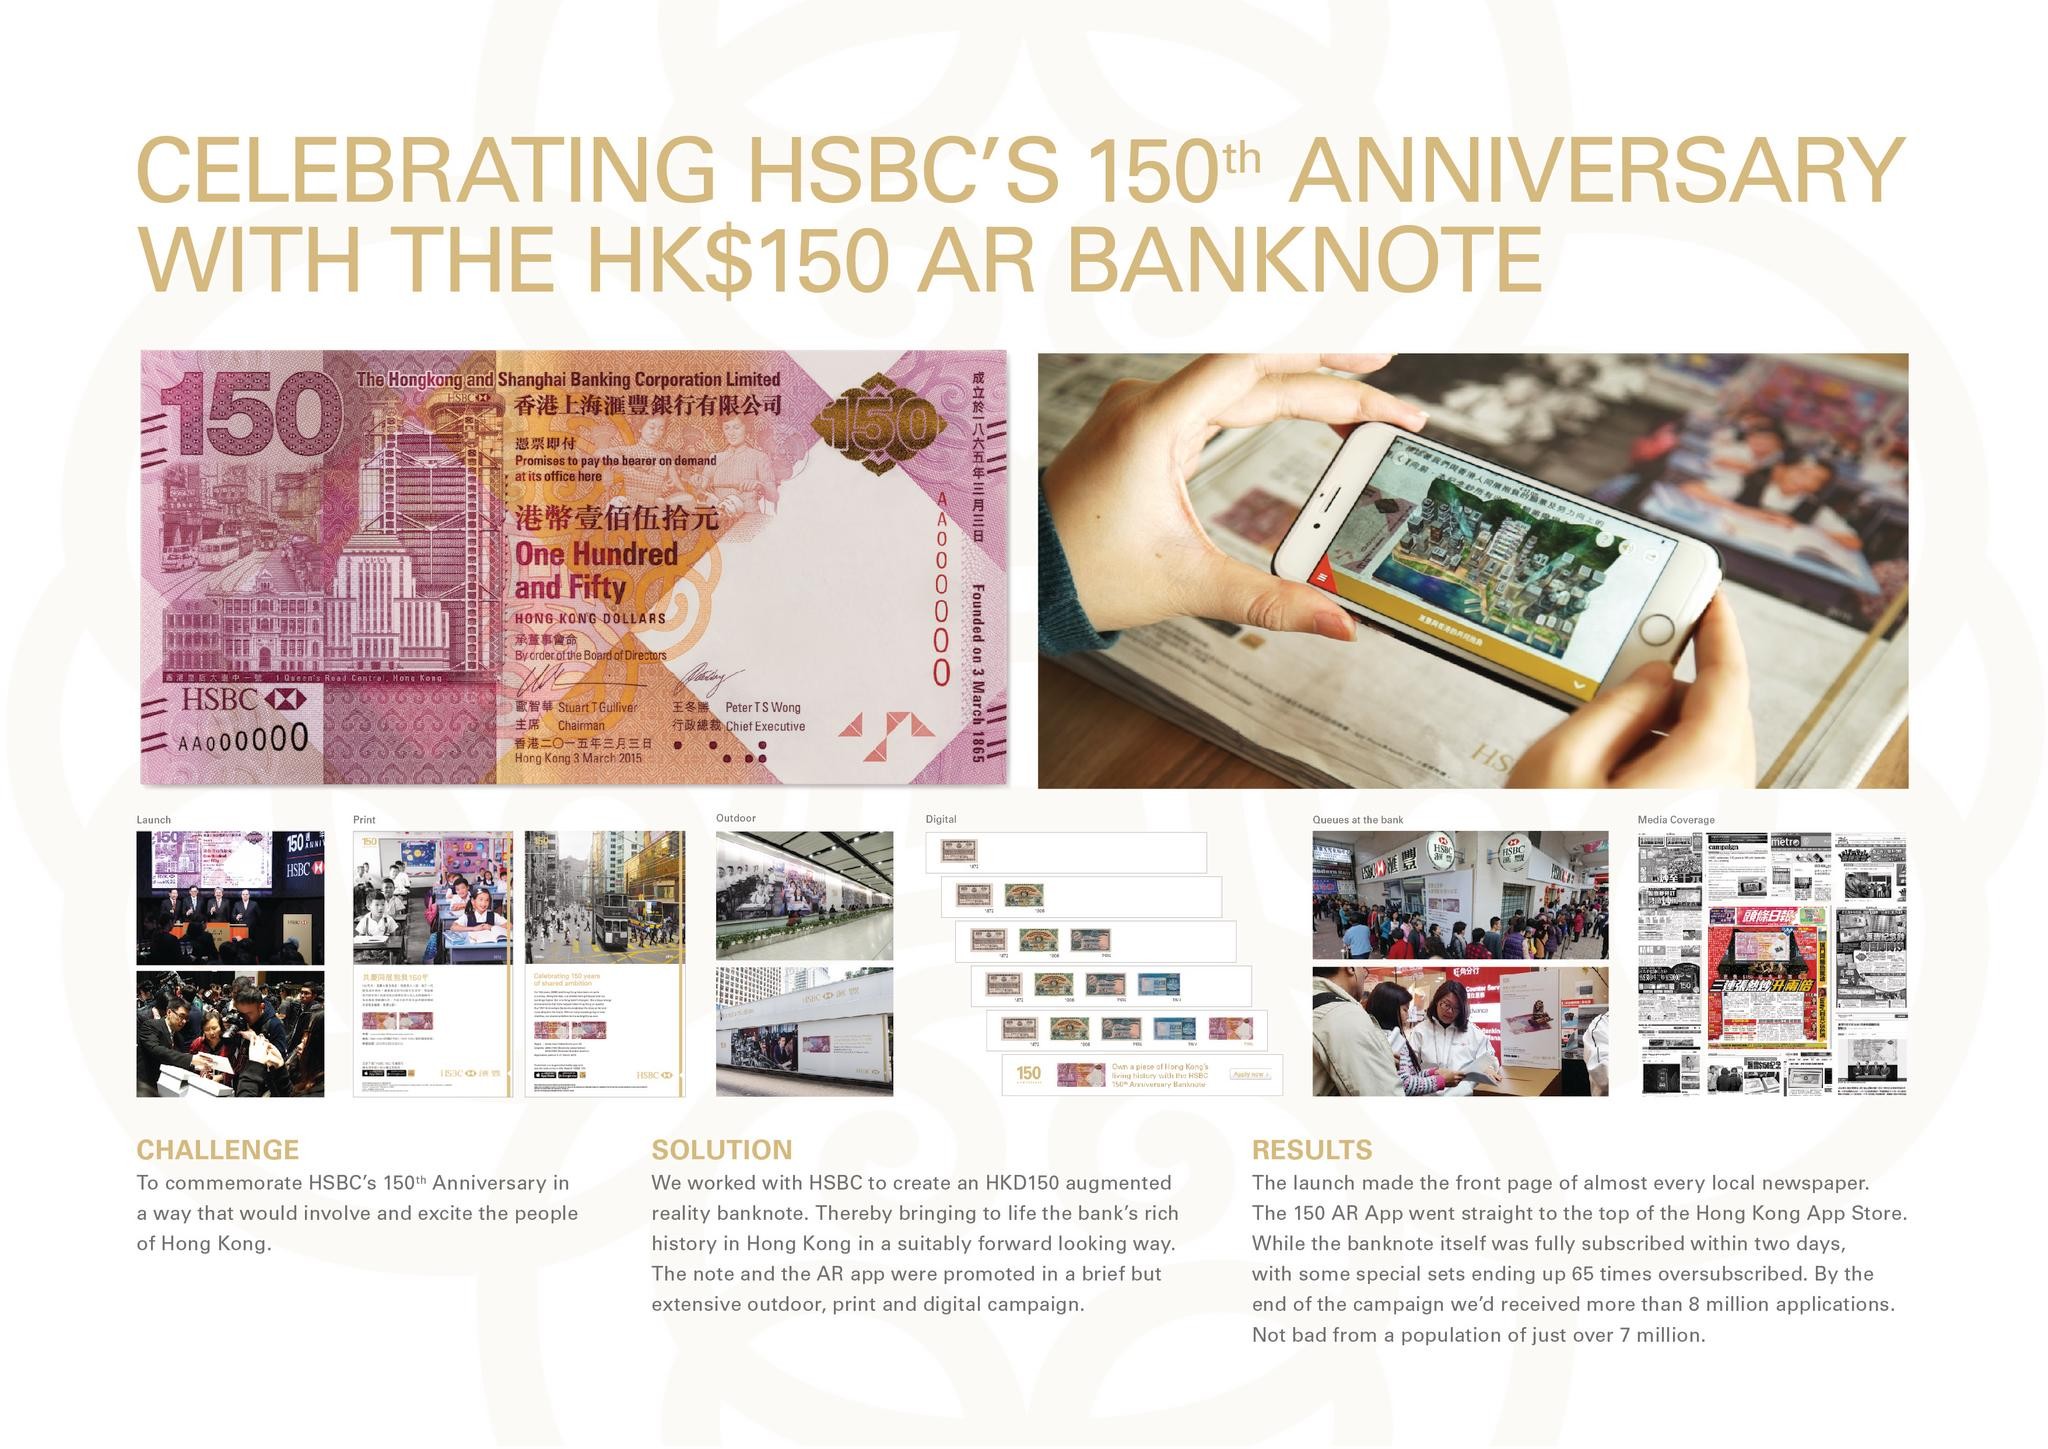 CELEBRATING HSBC’S 150TH ANNIVERSARY WITH HKD150 AR BANK NOTE